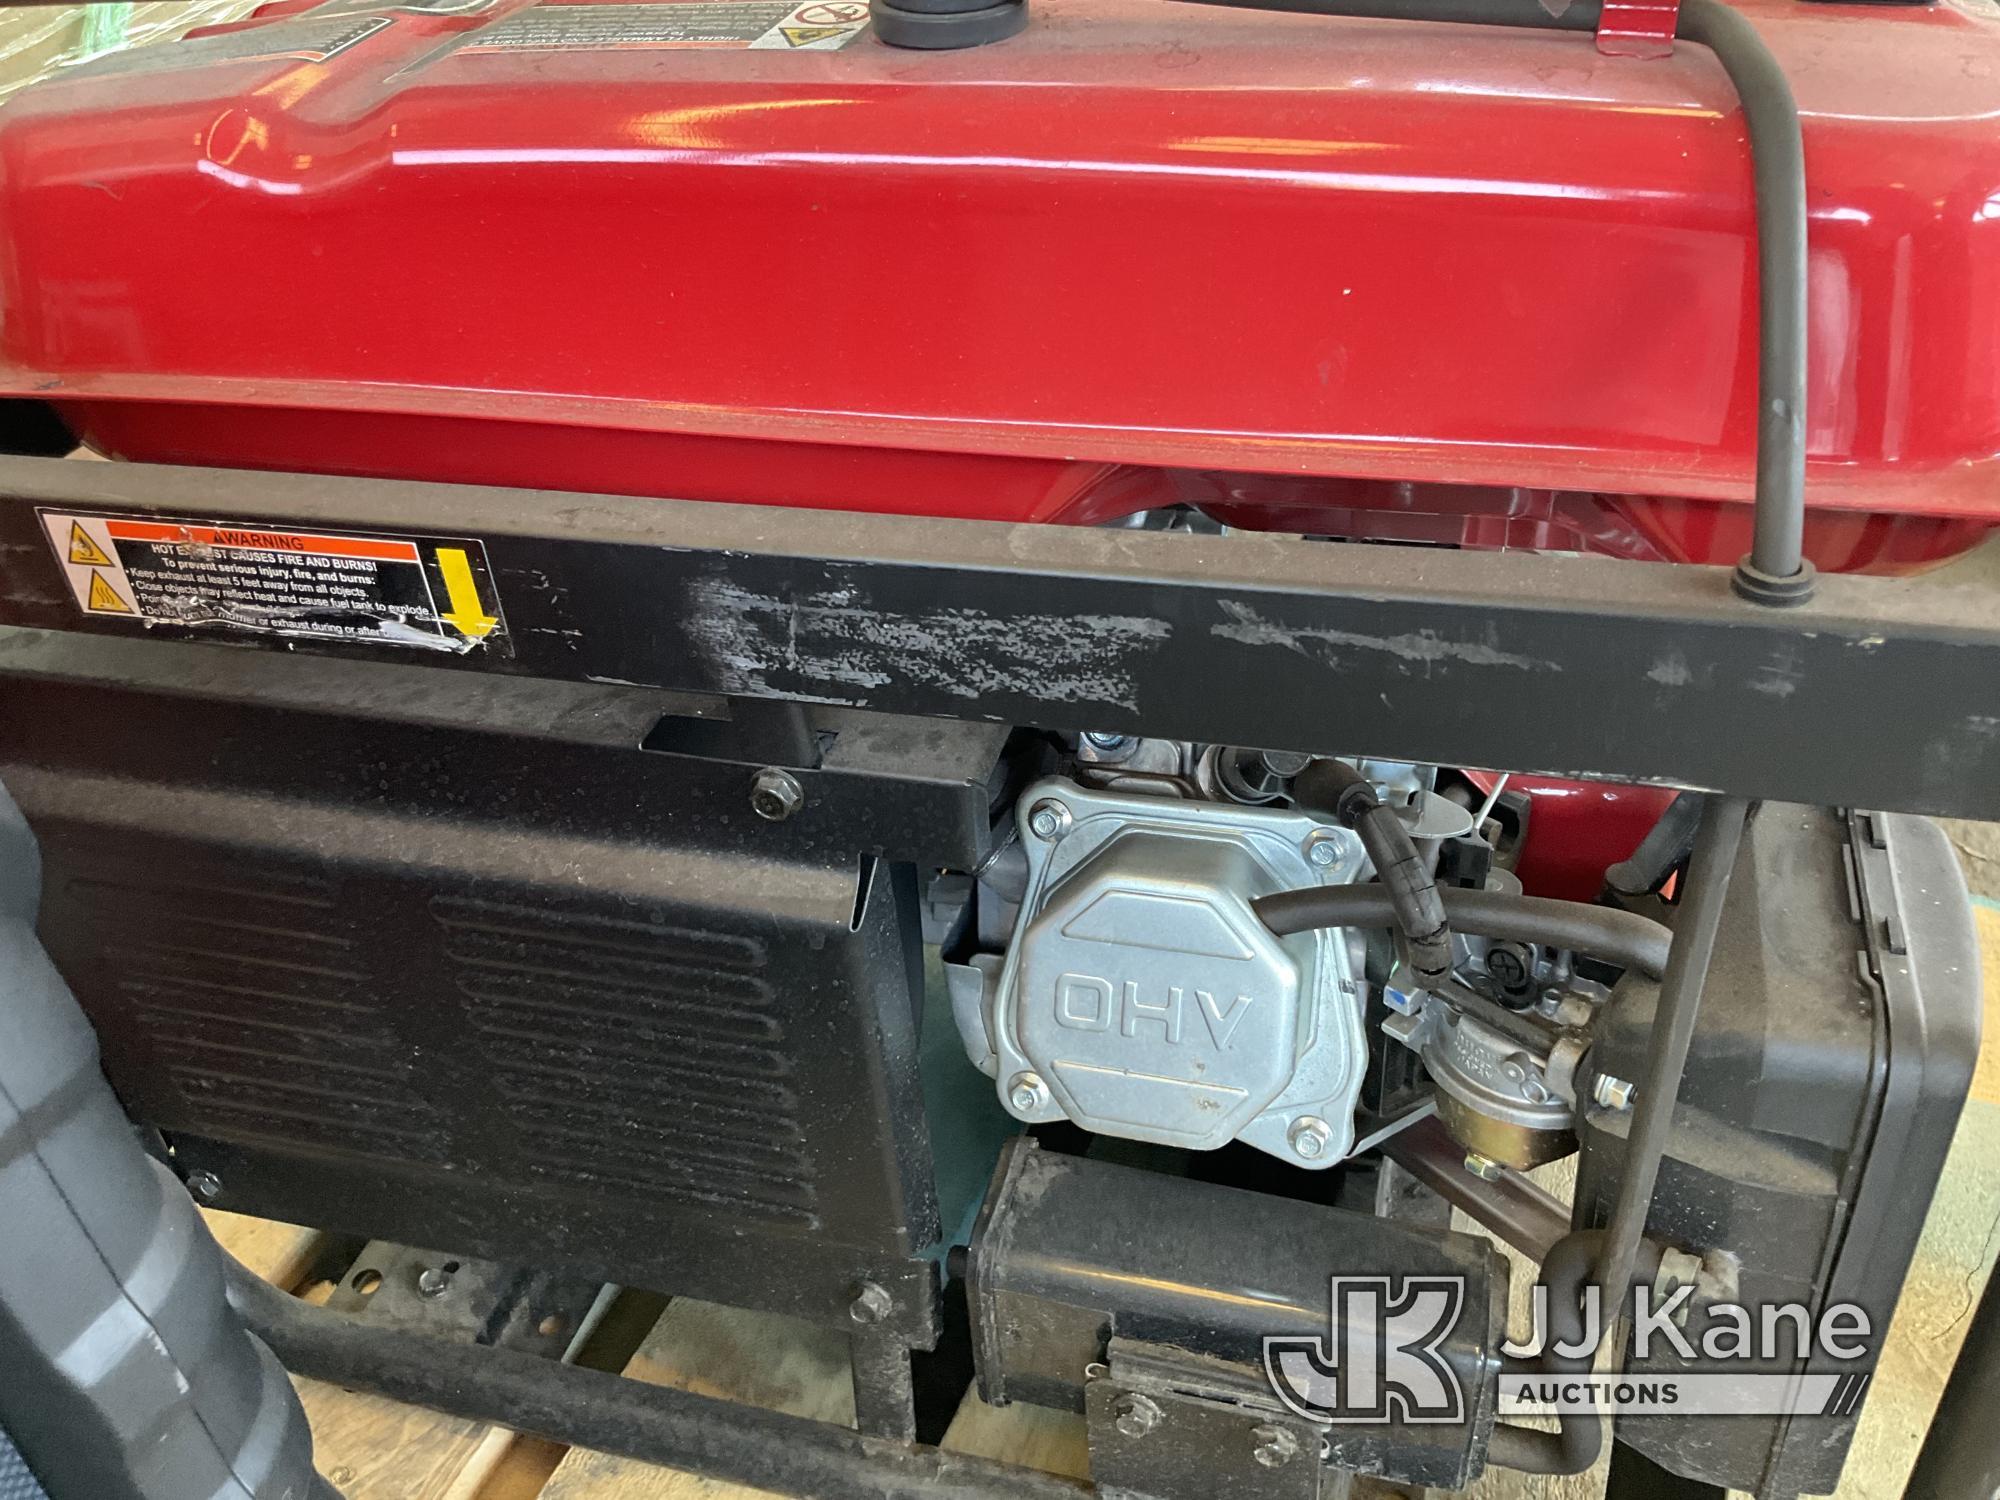 (Jurupa Valley, CA) 1 Predator 4375 Generator (Used) NOTE: This unit is being sold AS IS/WHERE IS vi